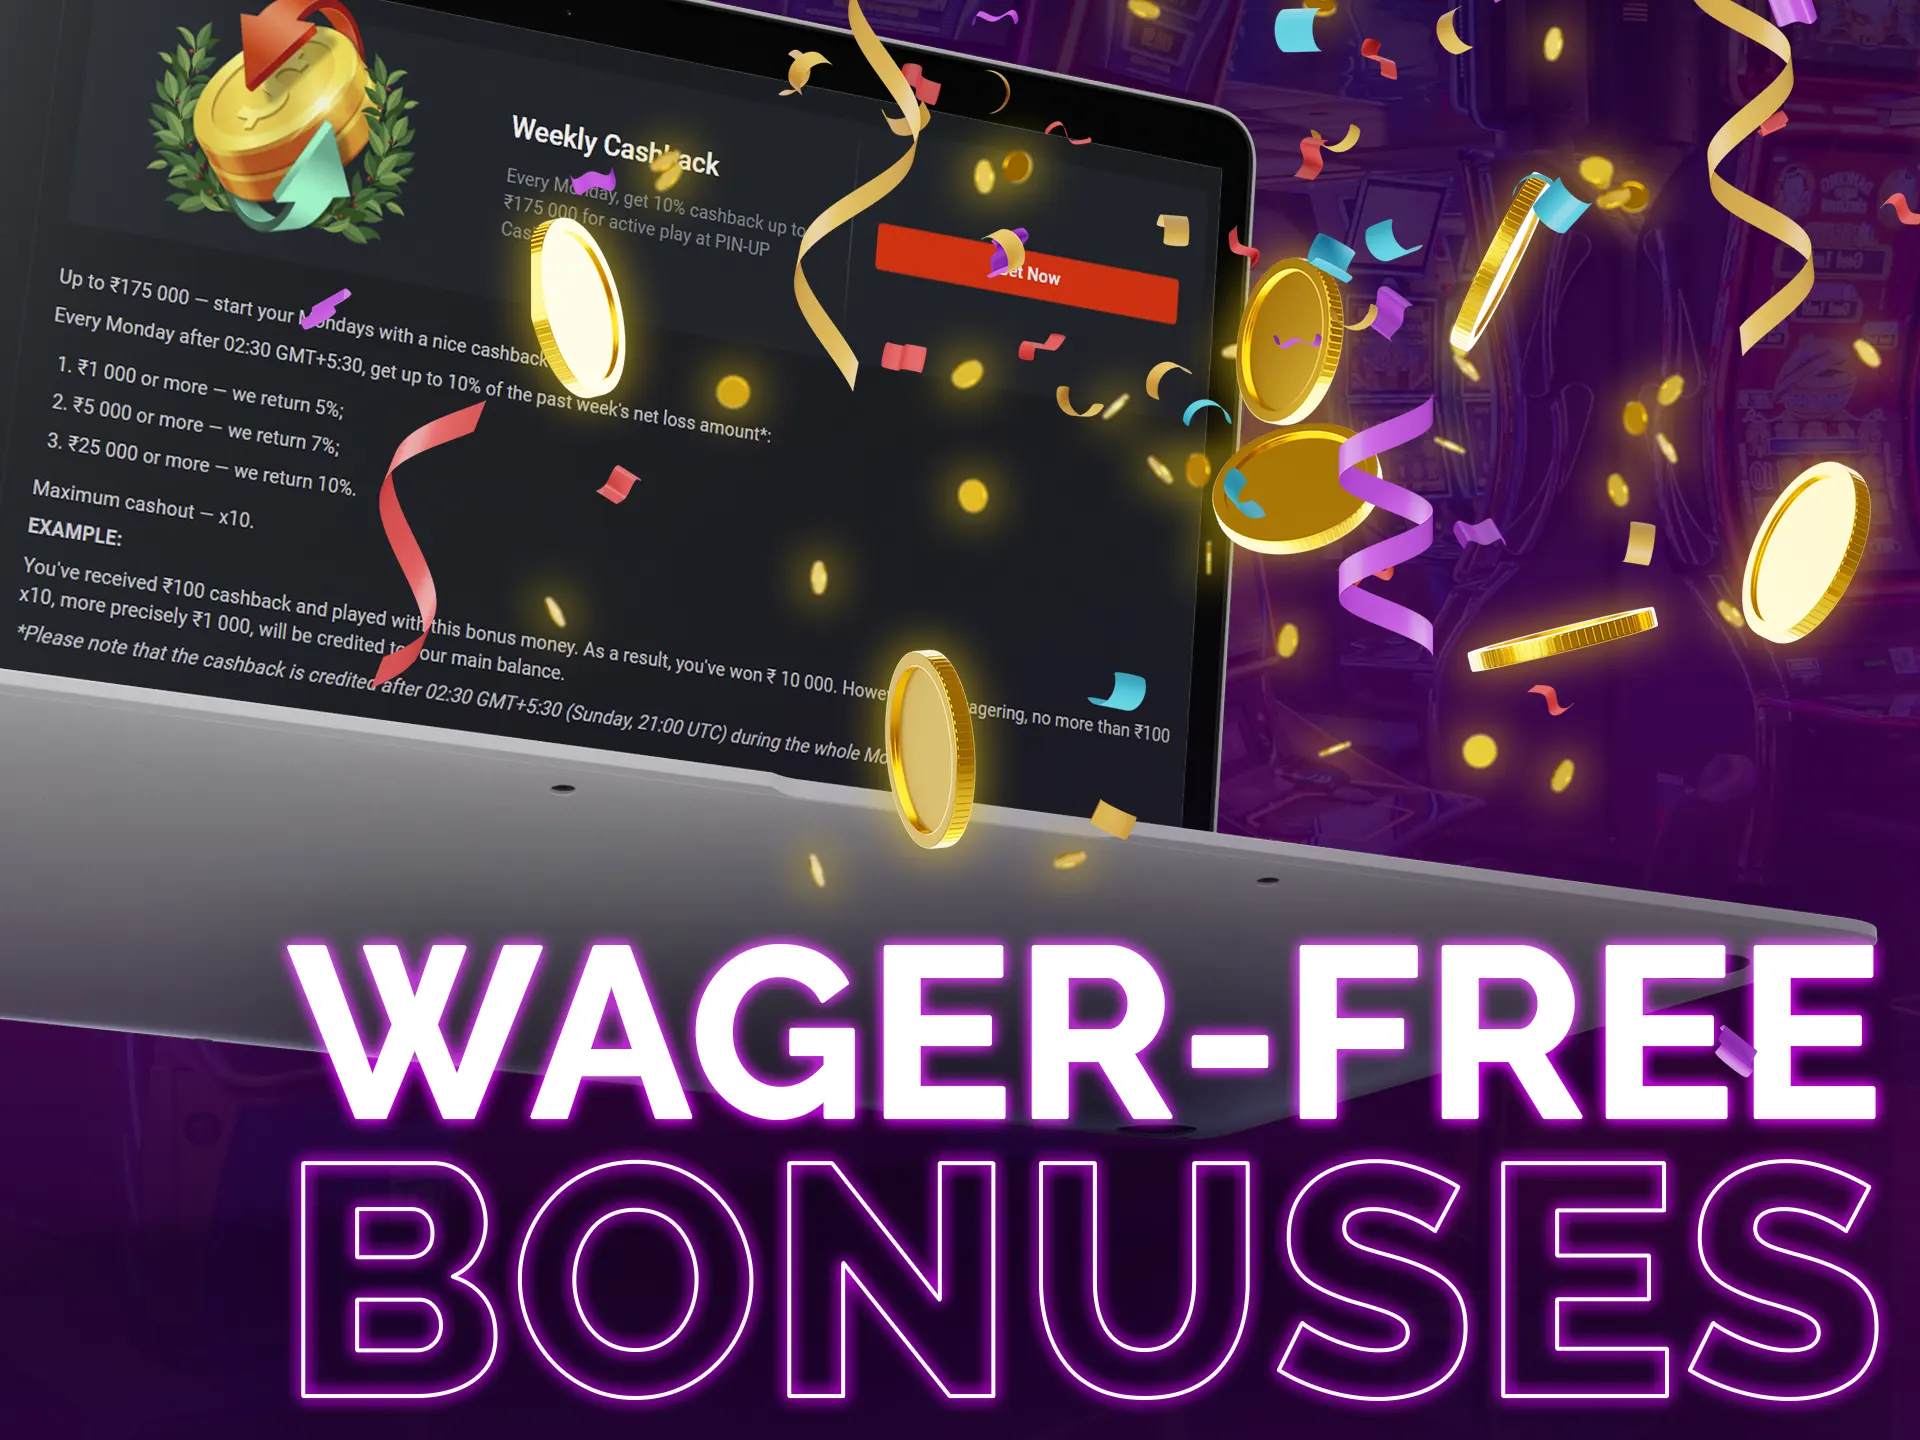 Some casino bonuses have no wagering requirements for easy withdrawal.